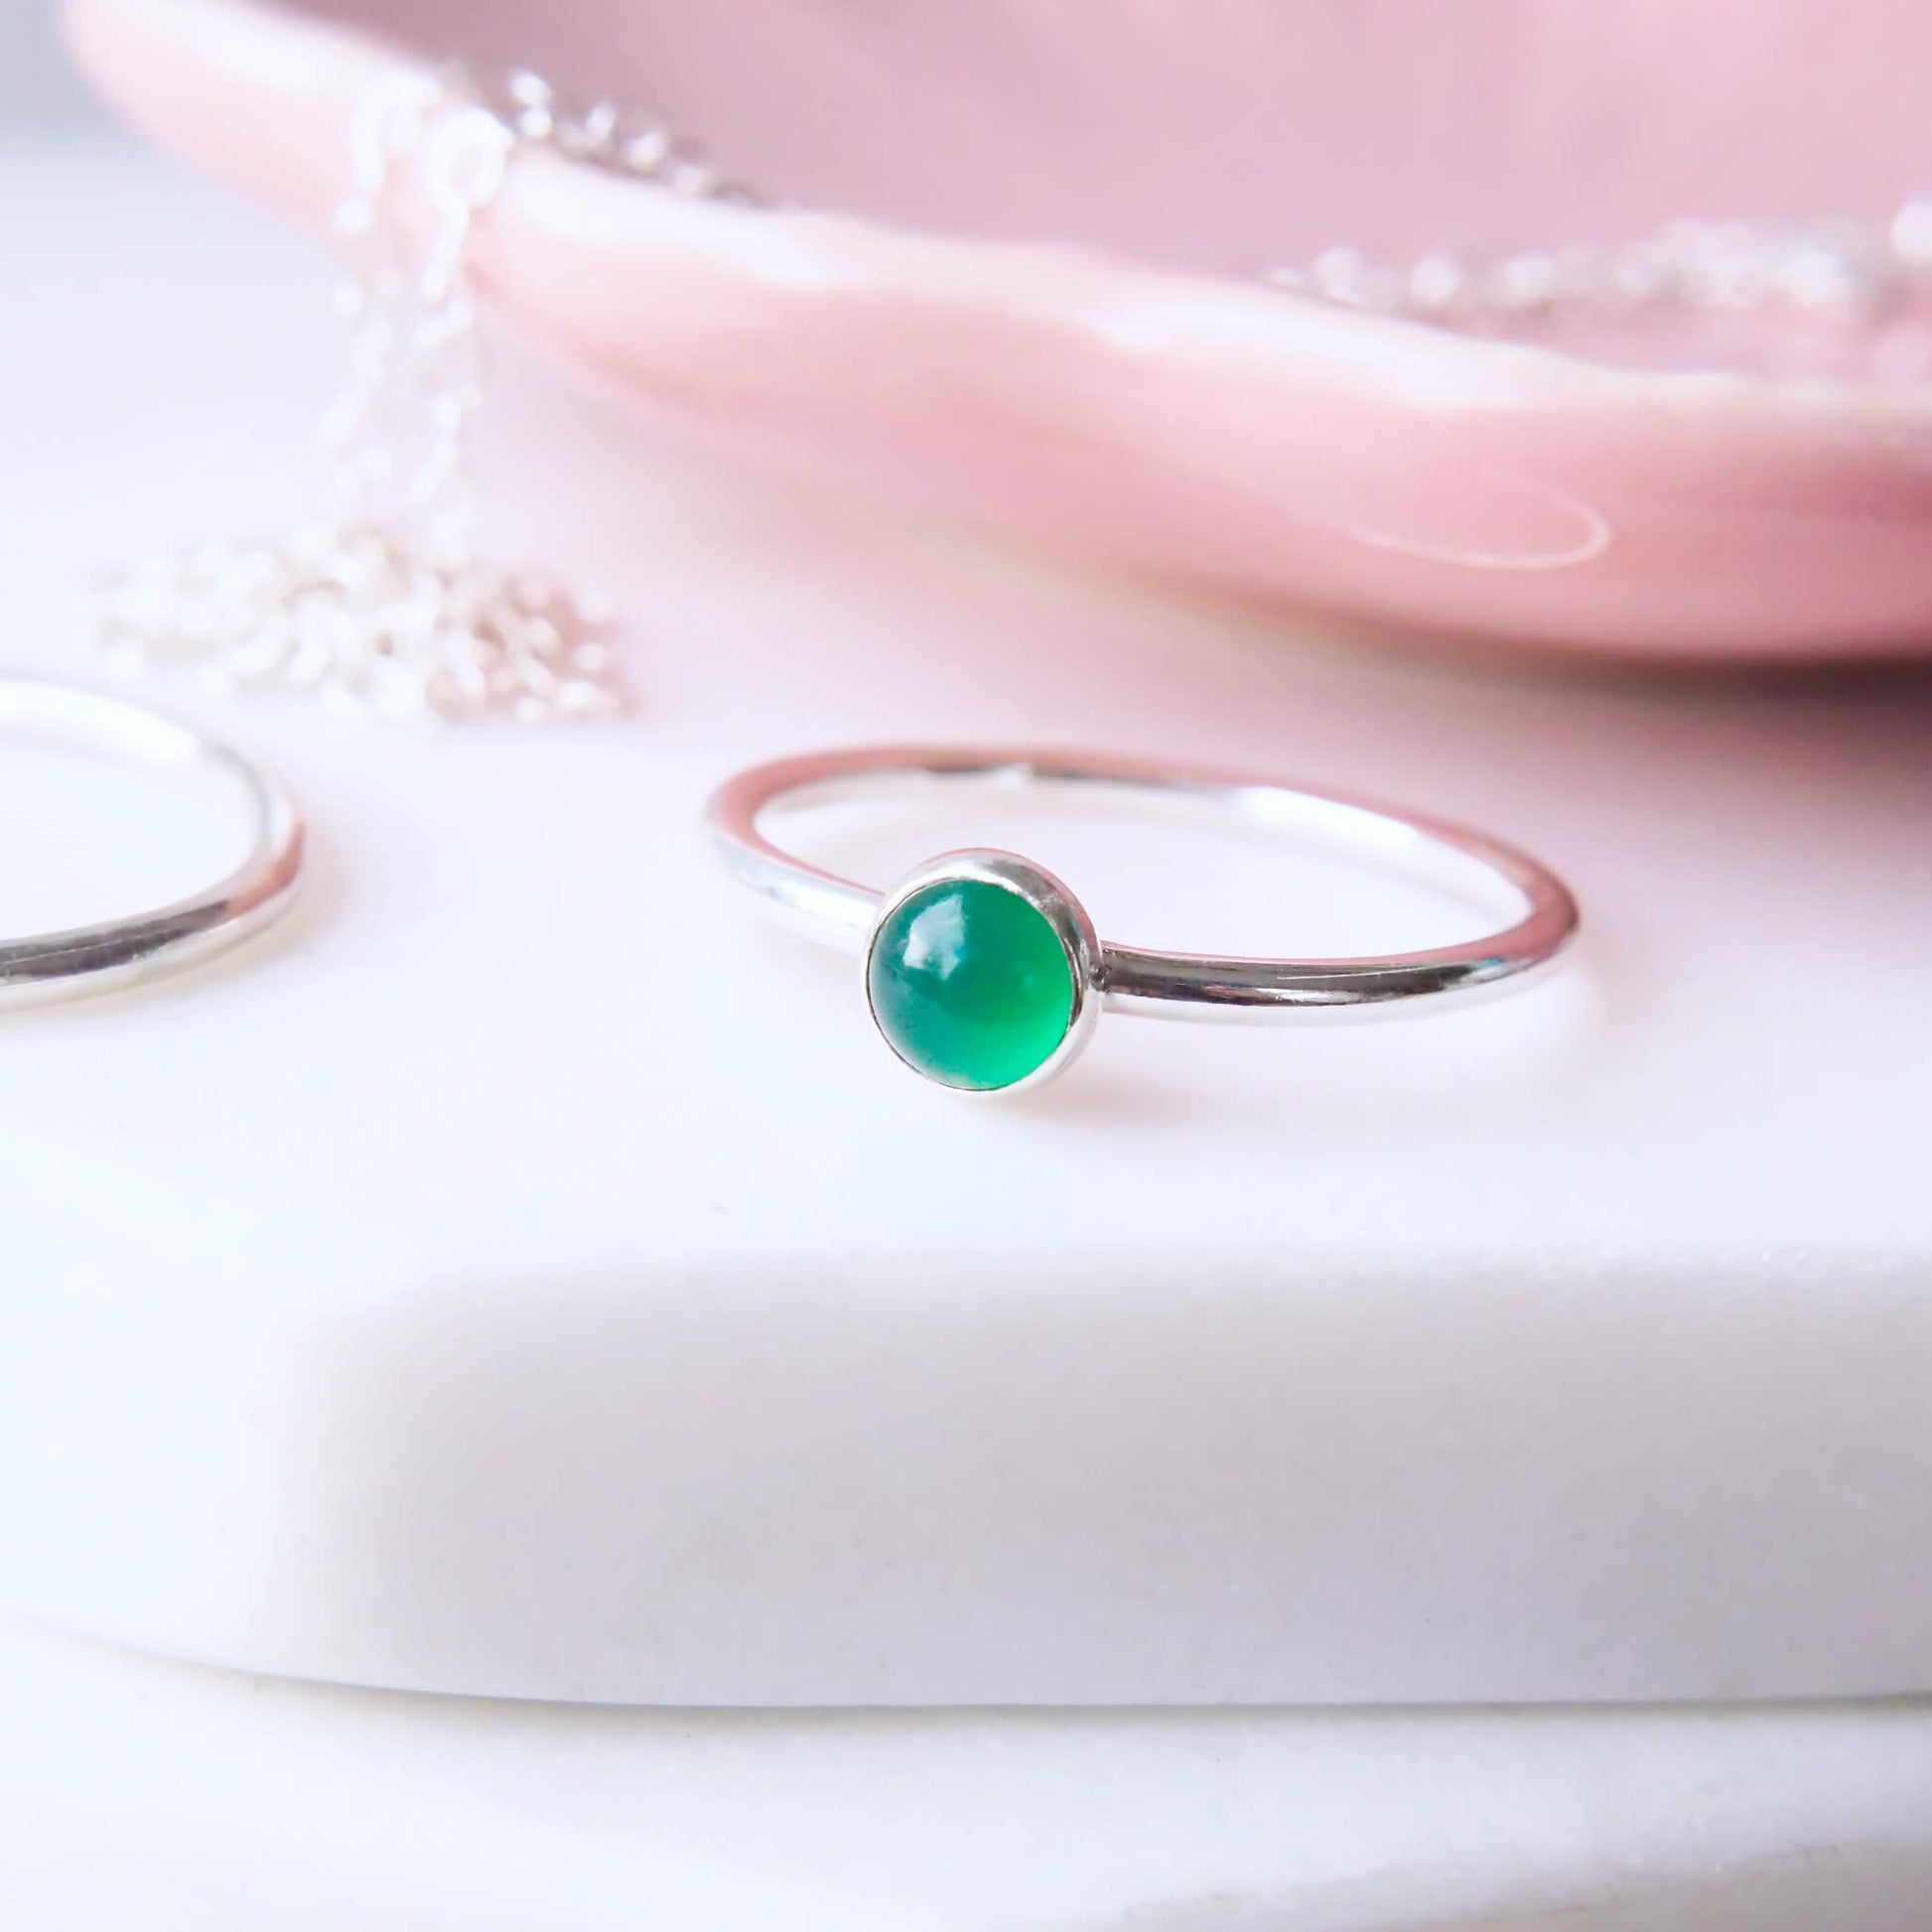 May Birthstone Cabochon Ring. Simple Style Green Agate Birthstone Ring for May. A round 5mm Emerald Green Agate Cabochon set onto a halo band of Sterling Silver. Handmade to your ring size by maram jewellery in UK